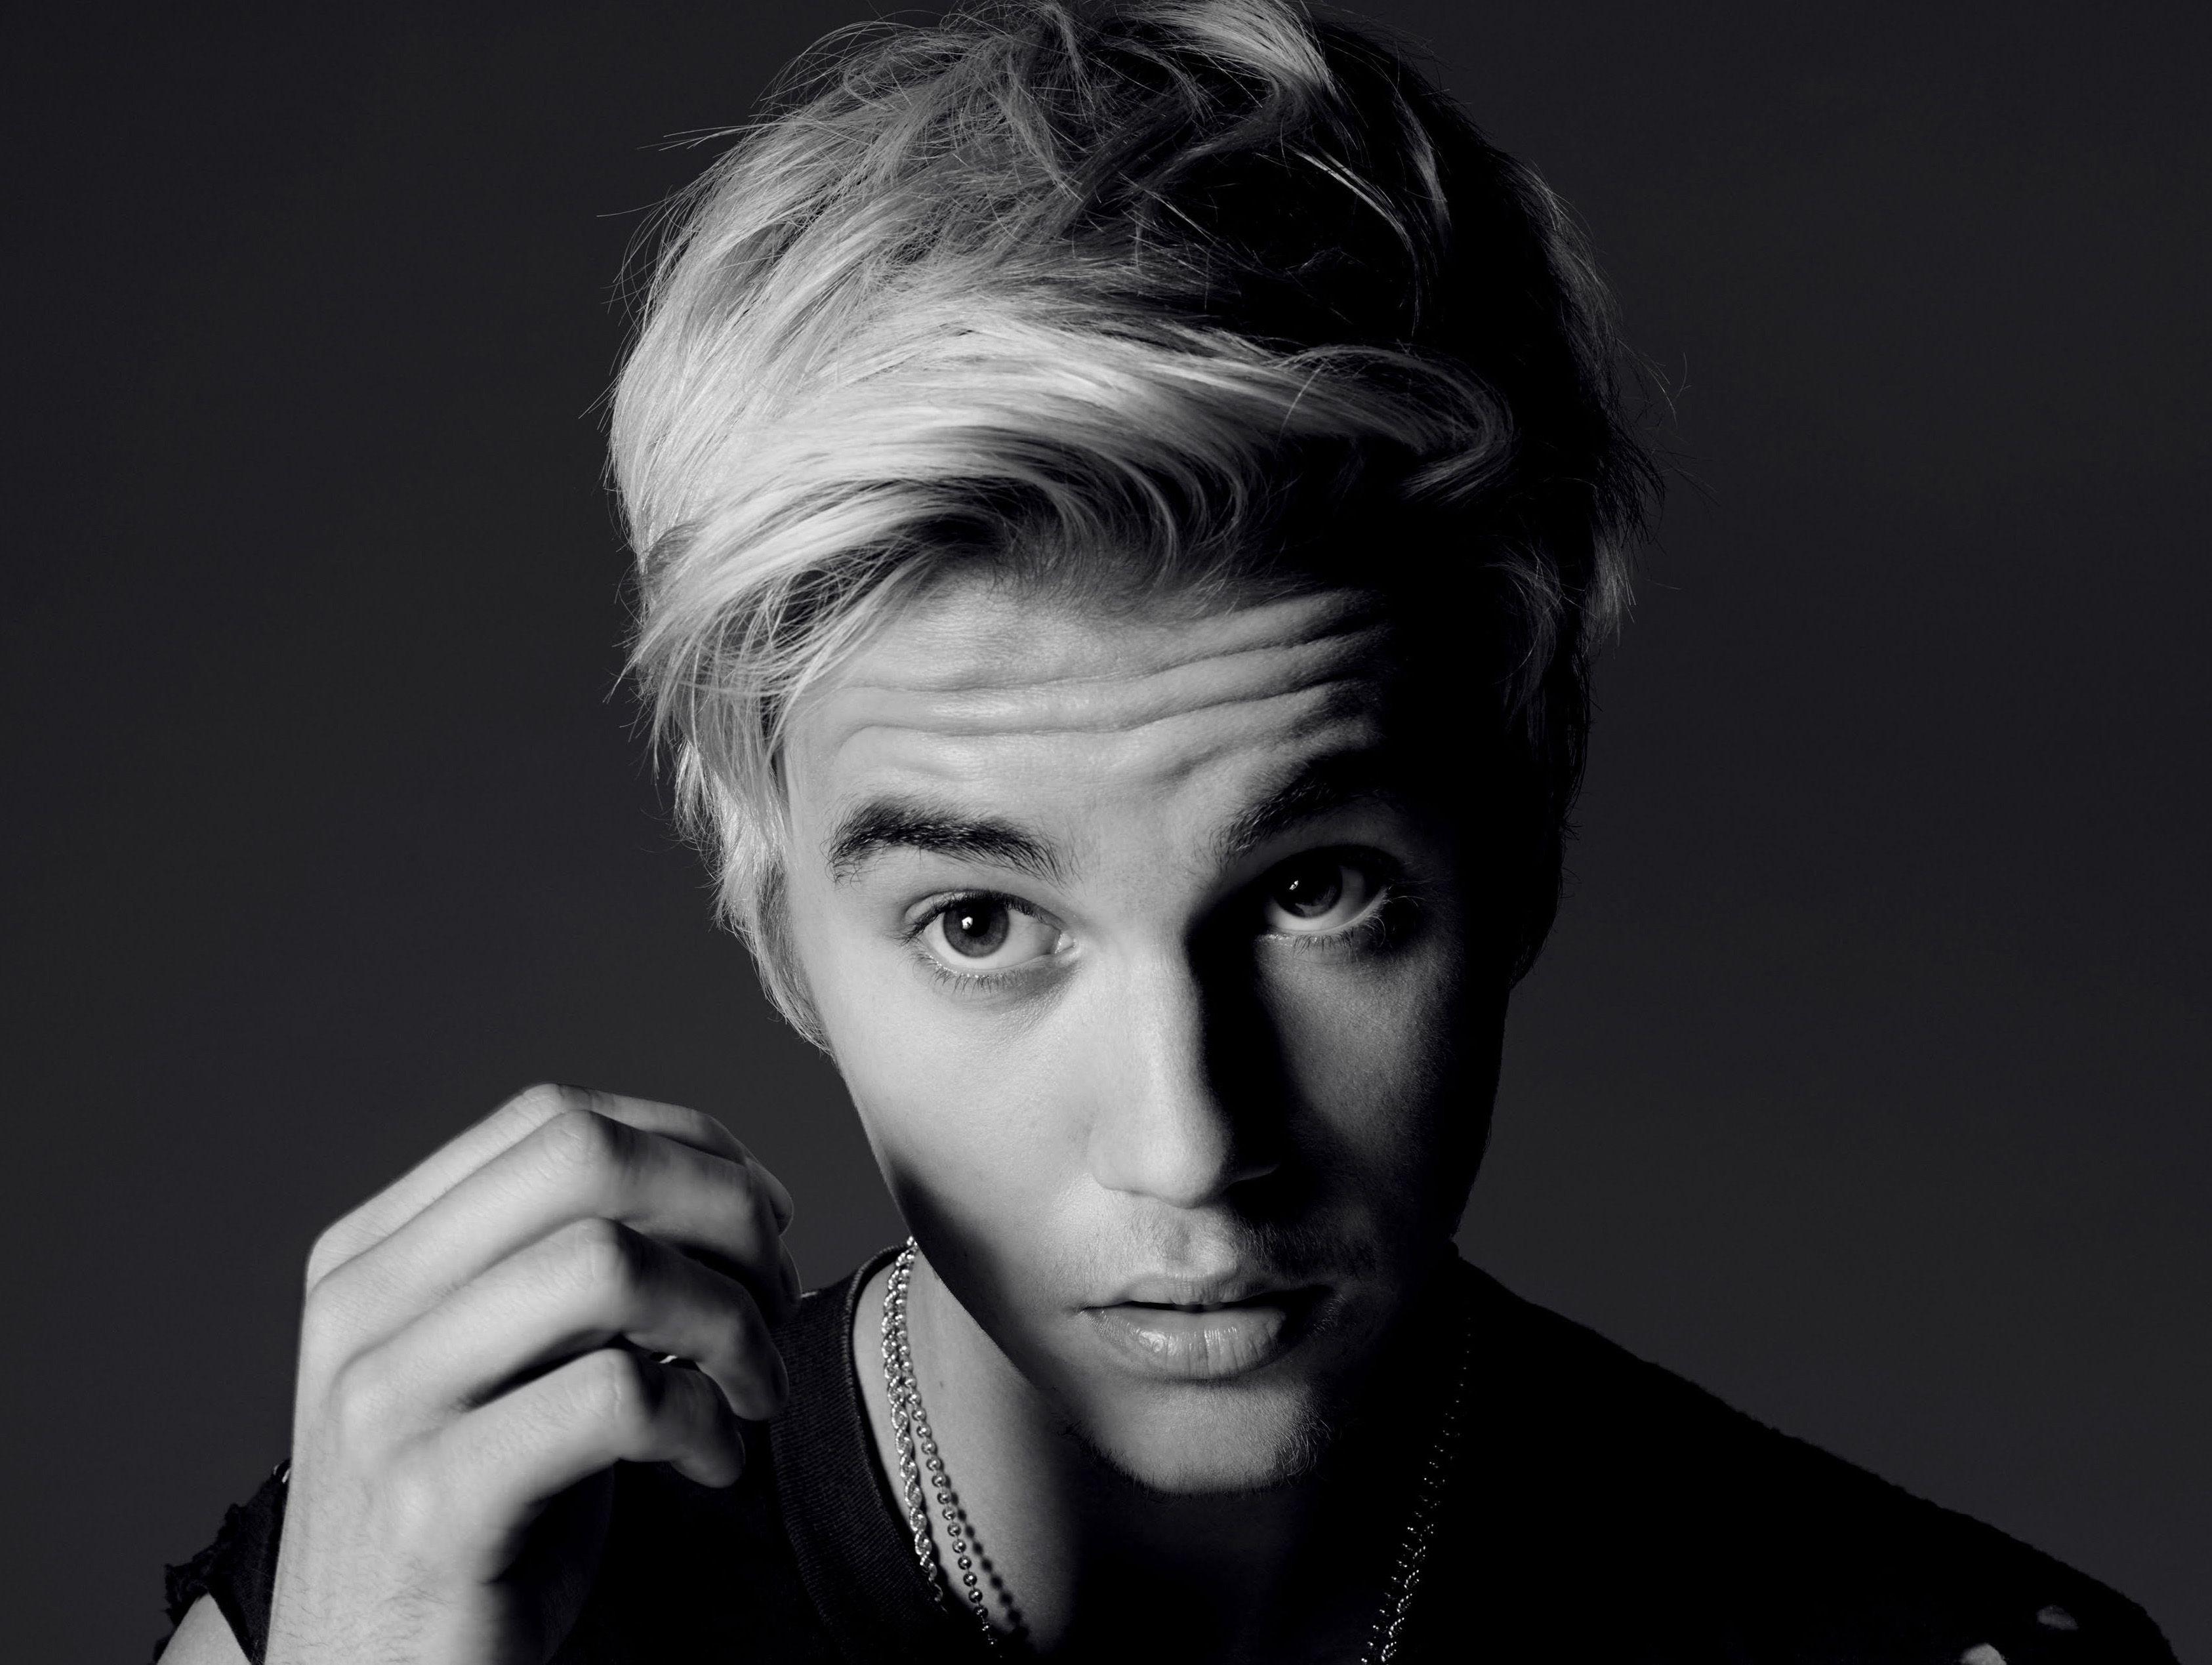 Justin Bieber Wallpaper High Resolution and Quality Download